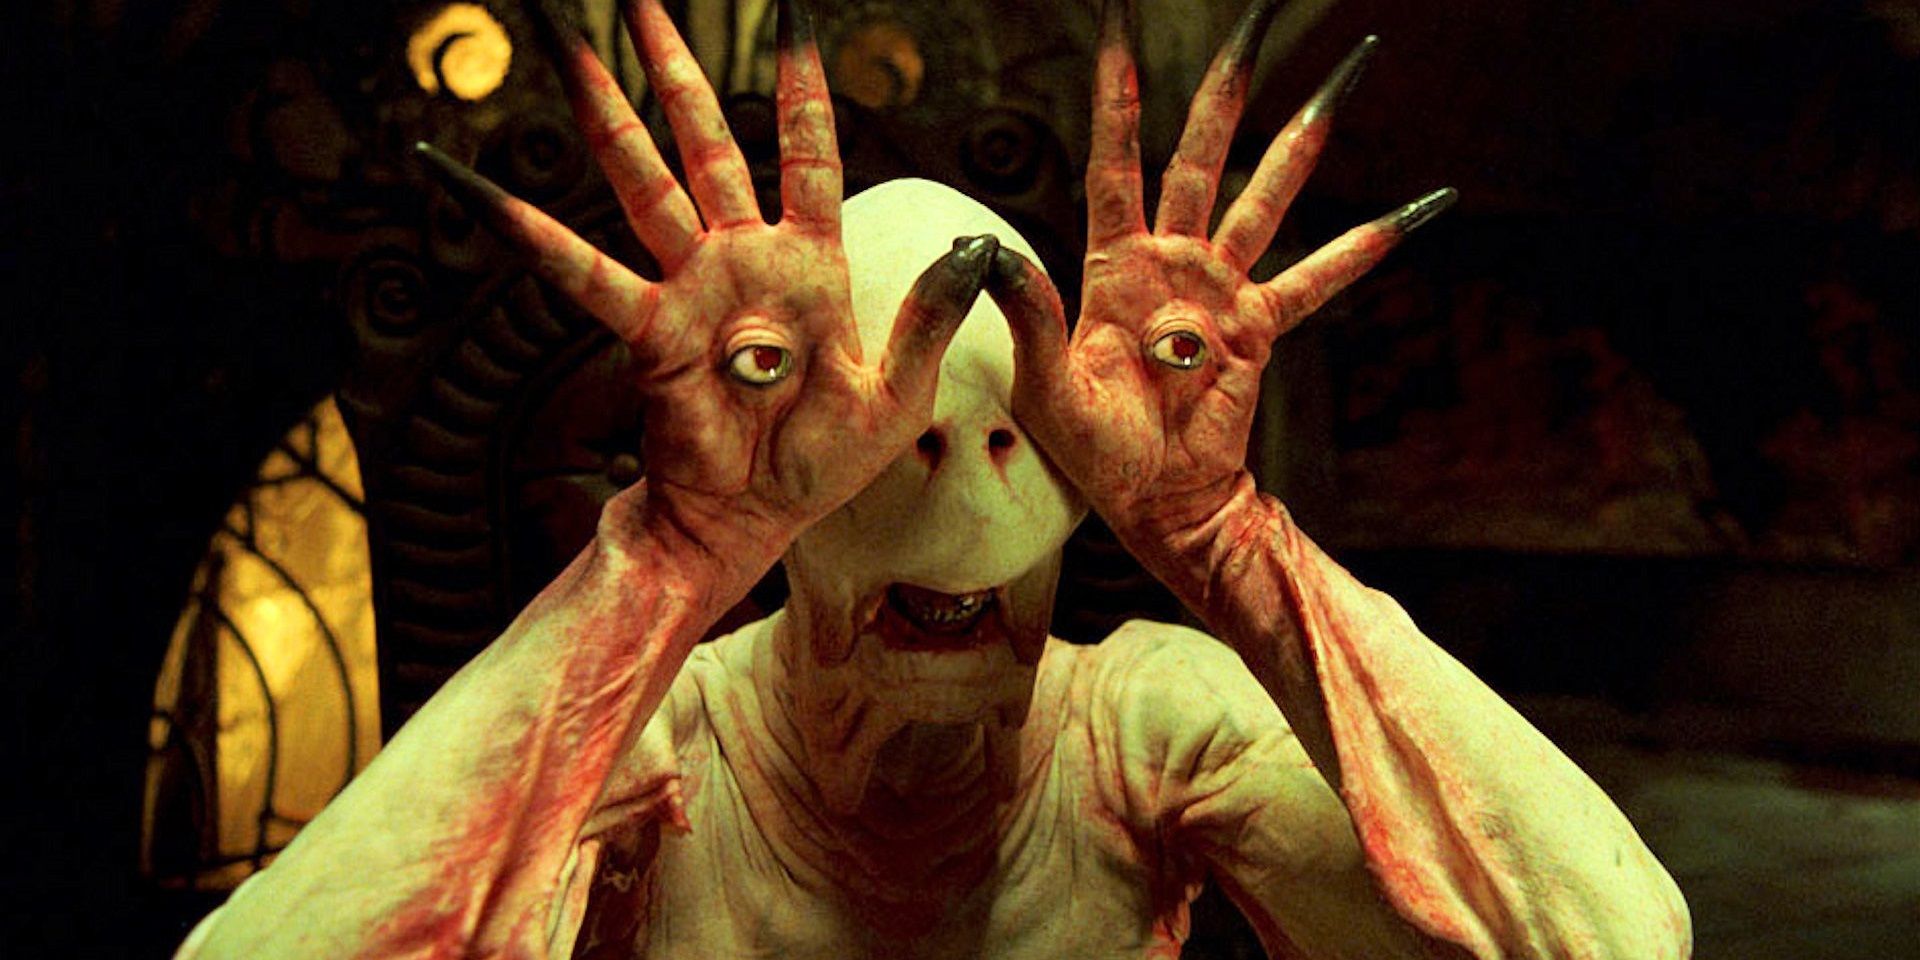 The Pale Man in Pans Labyrinth 1